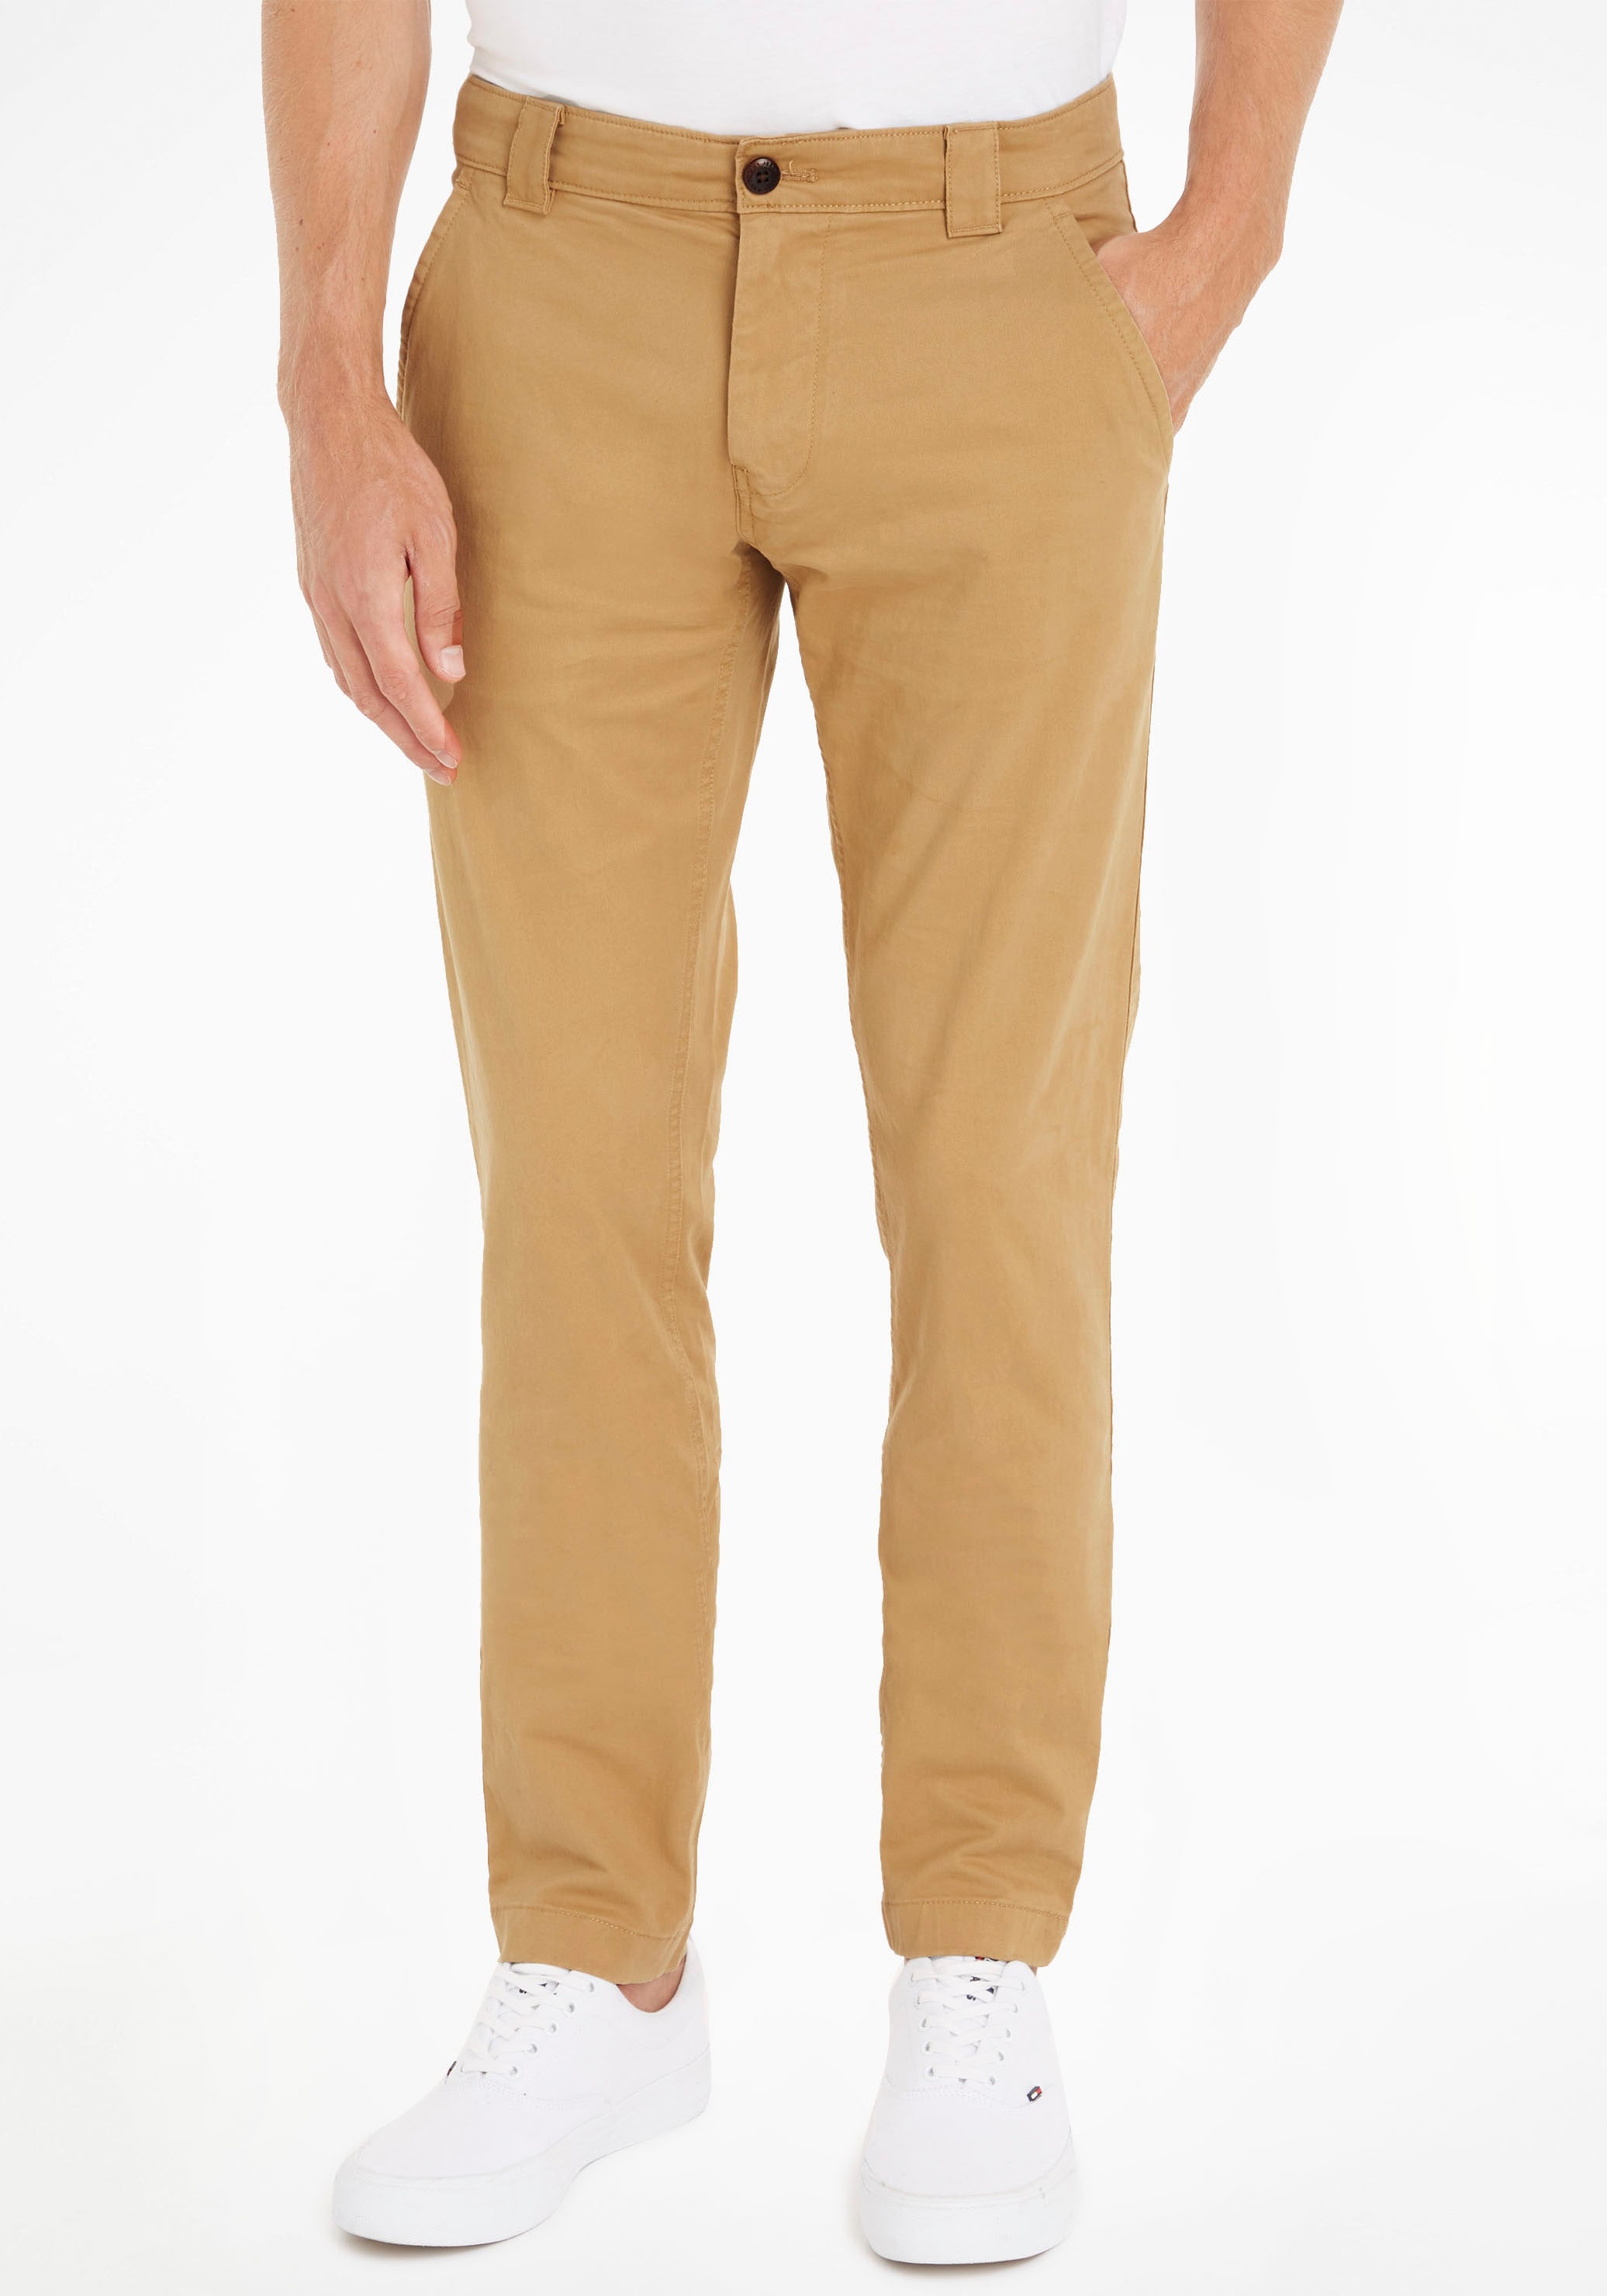 CHINO Markenlabel bei »TJM ♕ Jeans SCANTON PANT«, Tommy mit Chinohose